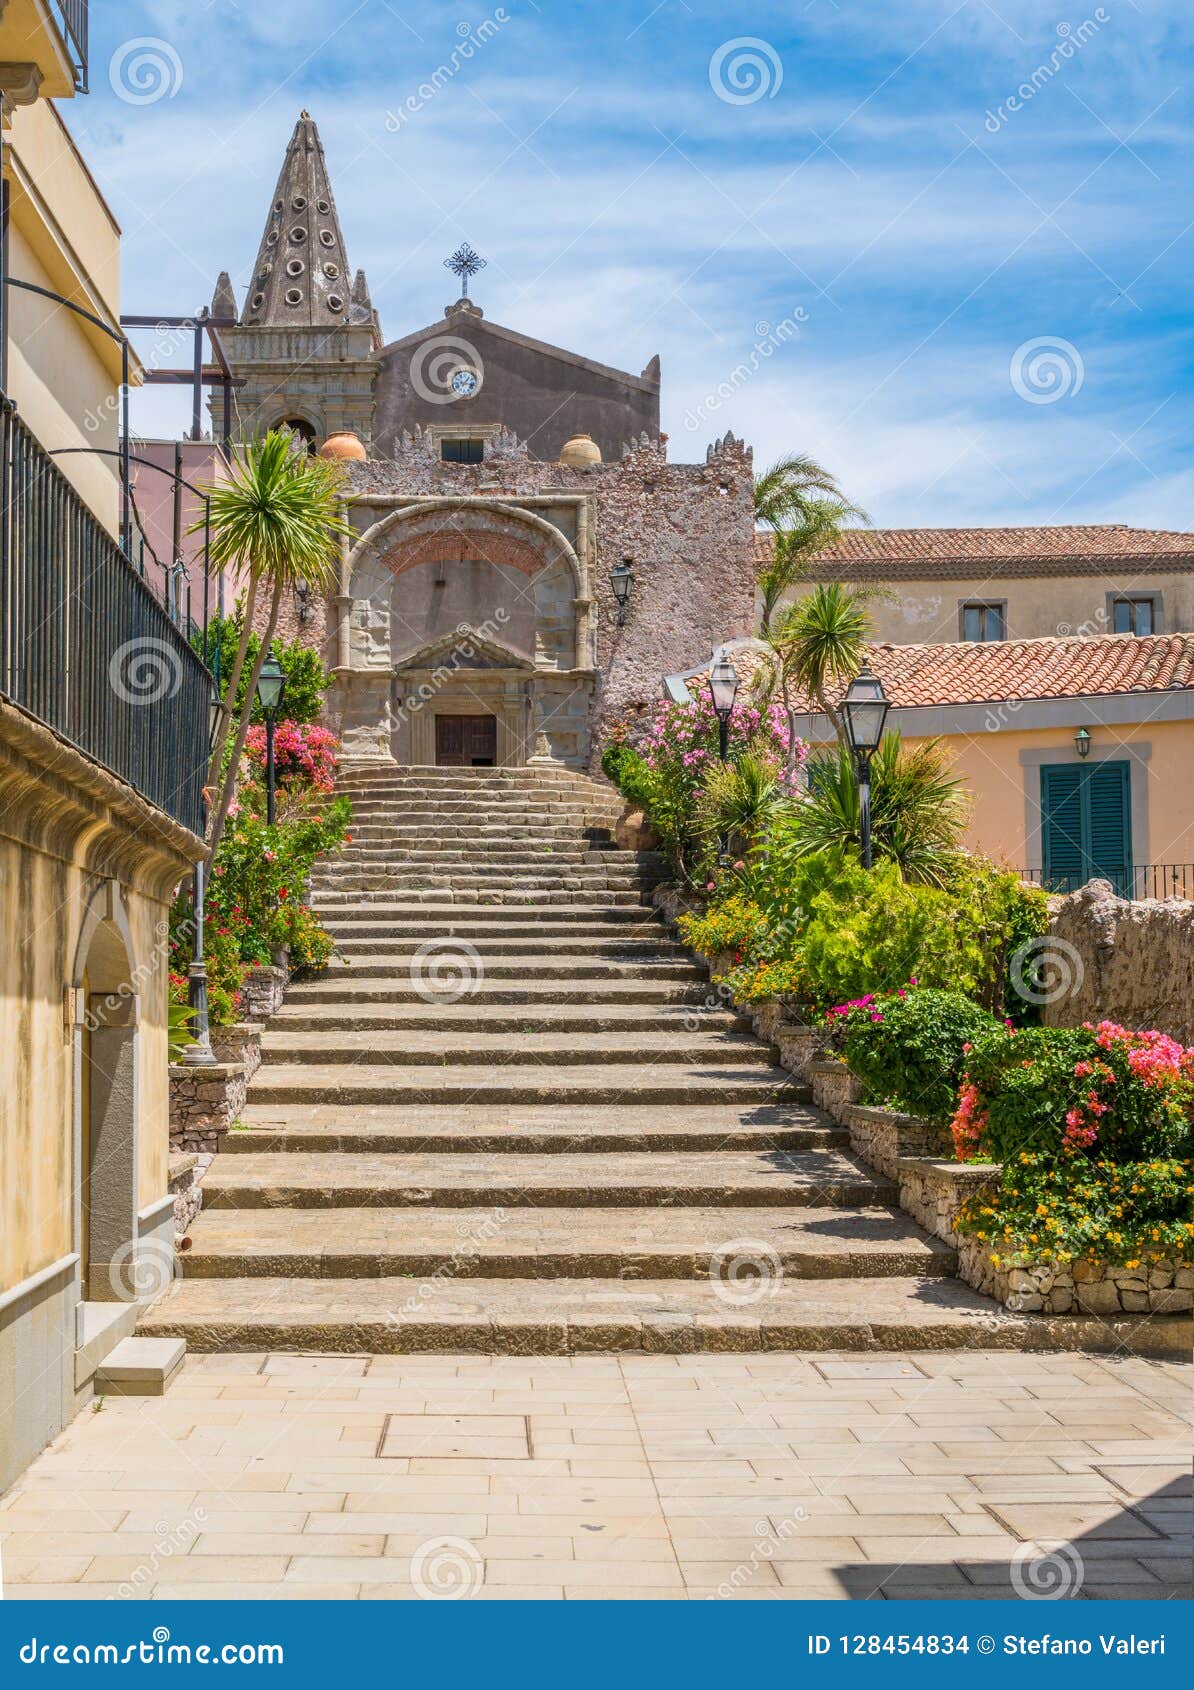 church of the holy trinity, in forza d`agrÃÂ², picturesque town in the province of messina, sicily, southern italy.